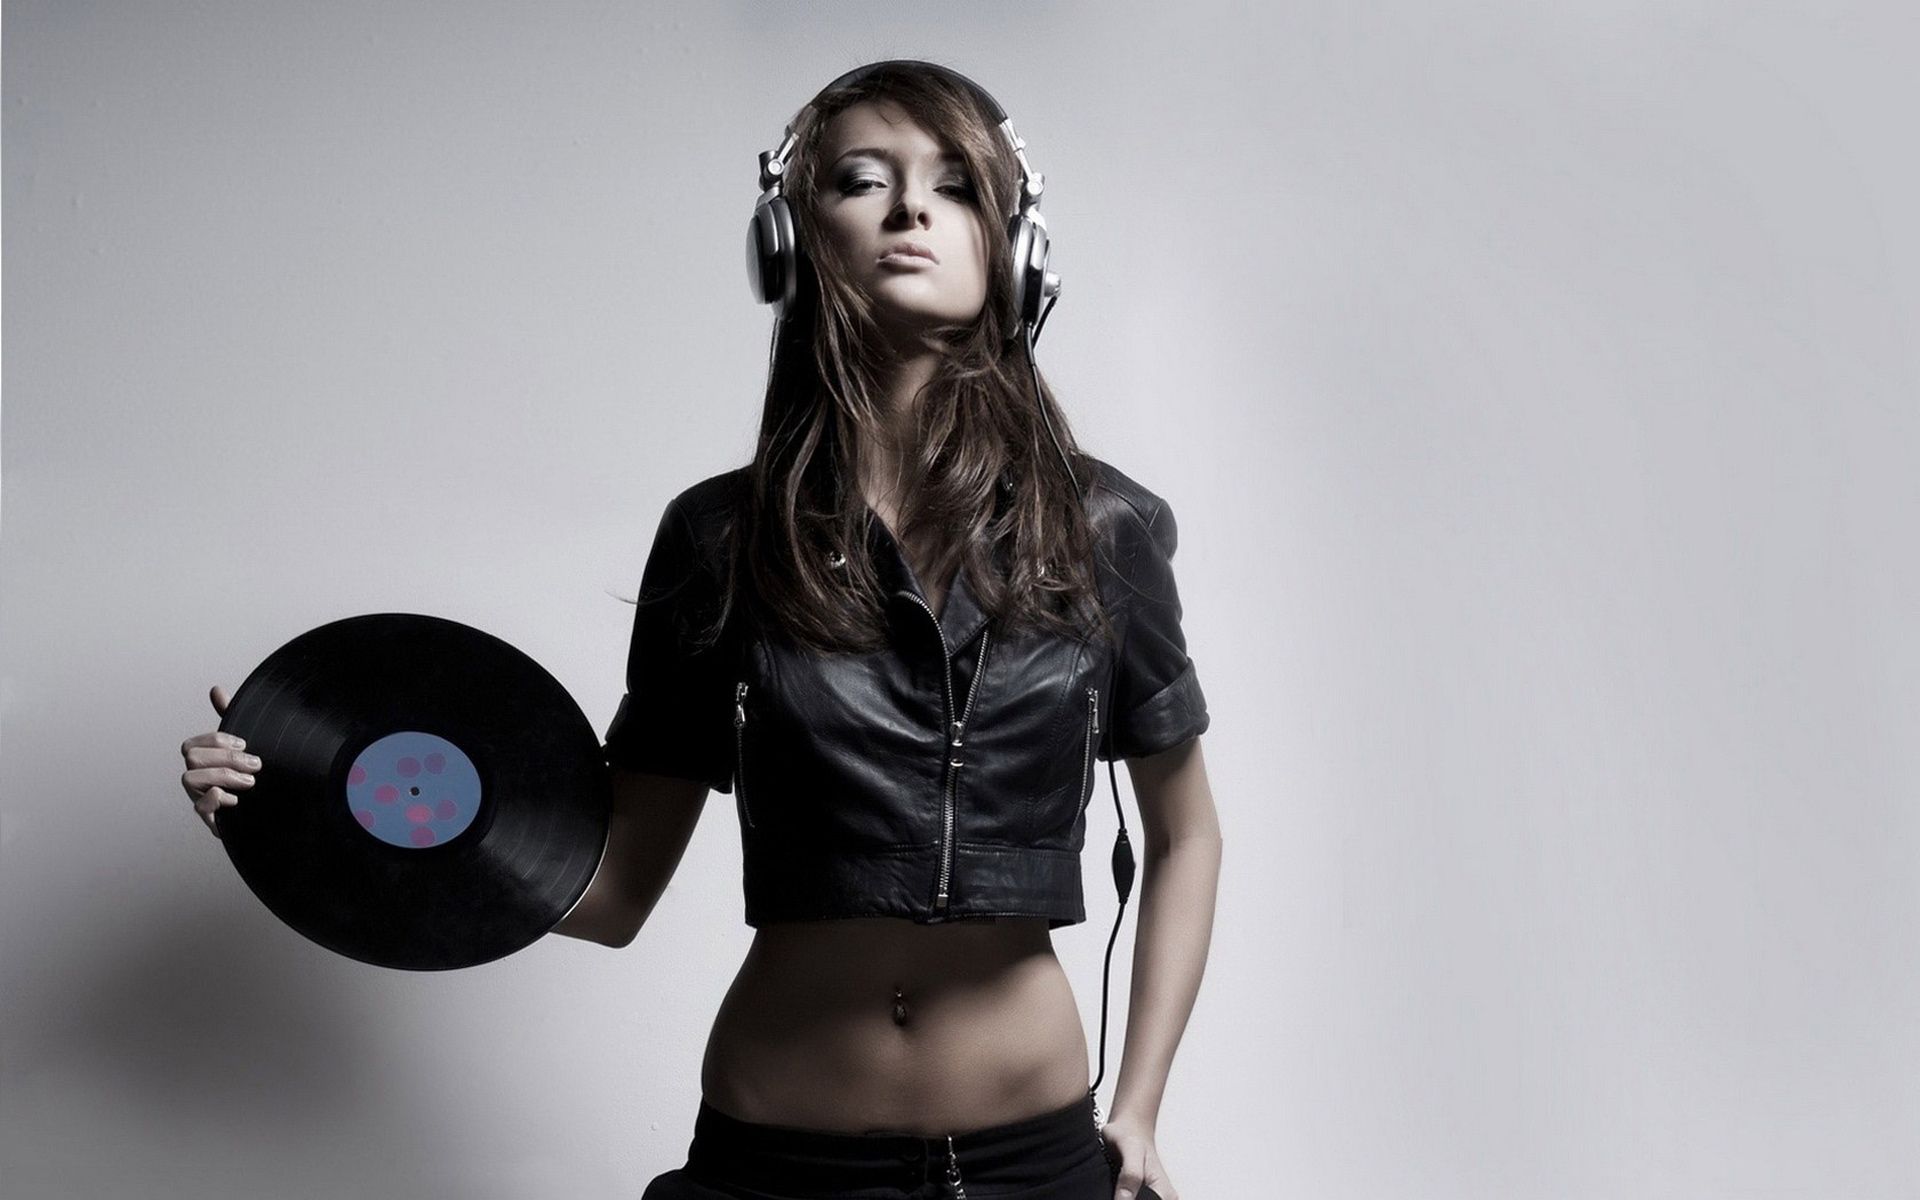 girl with headphones #wallpapers via http://www.wallsave.com ...